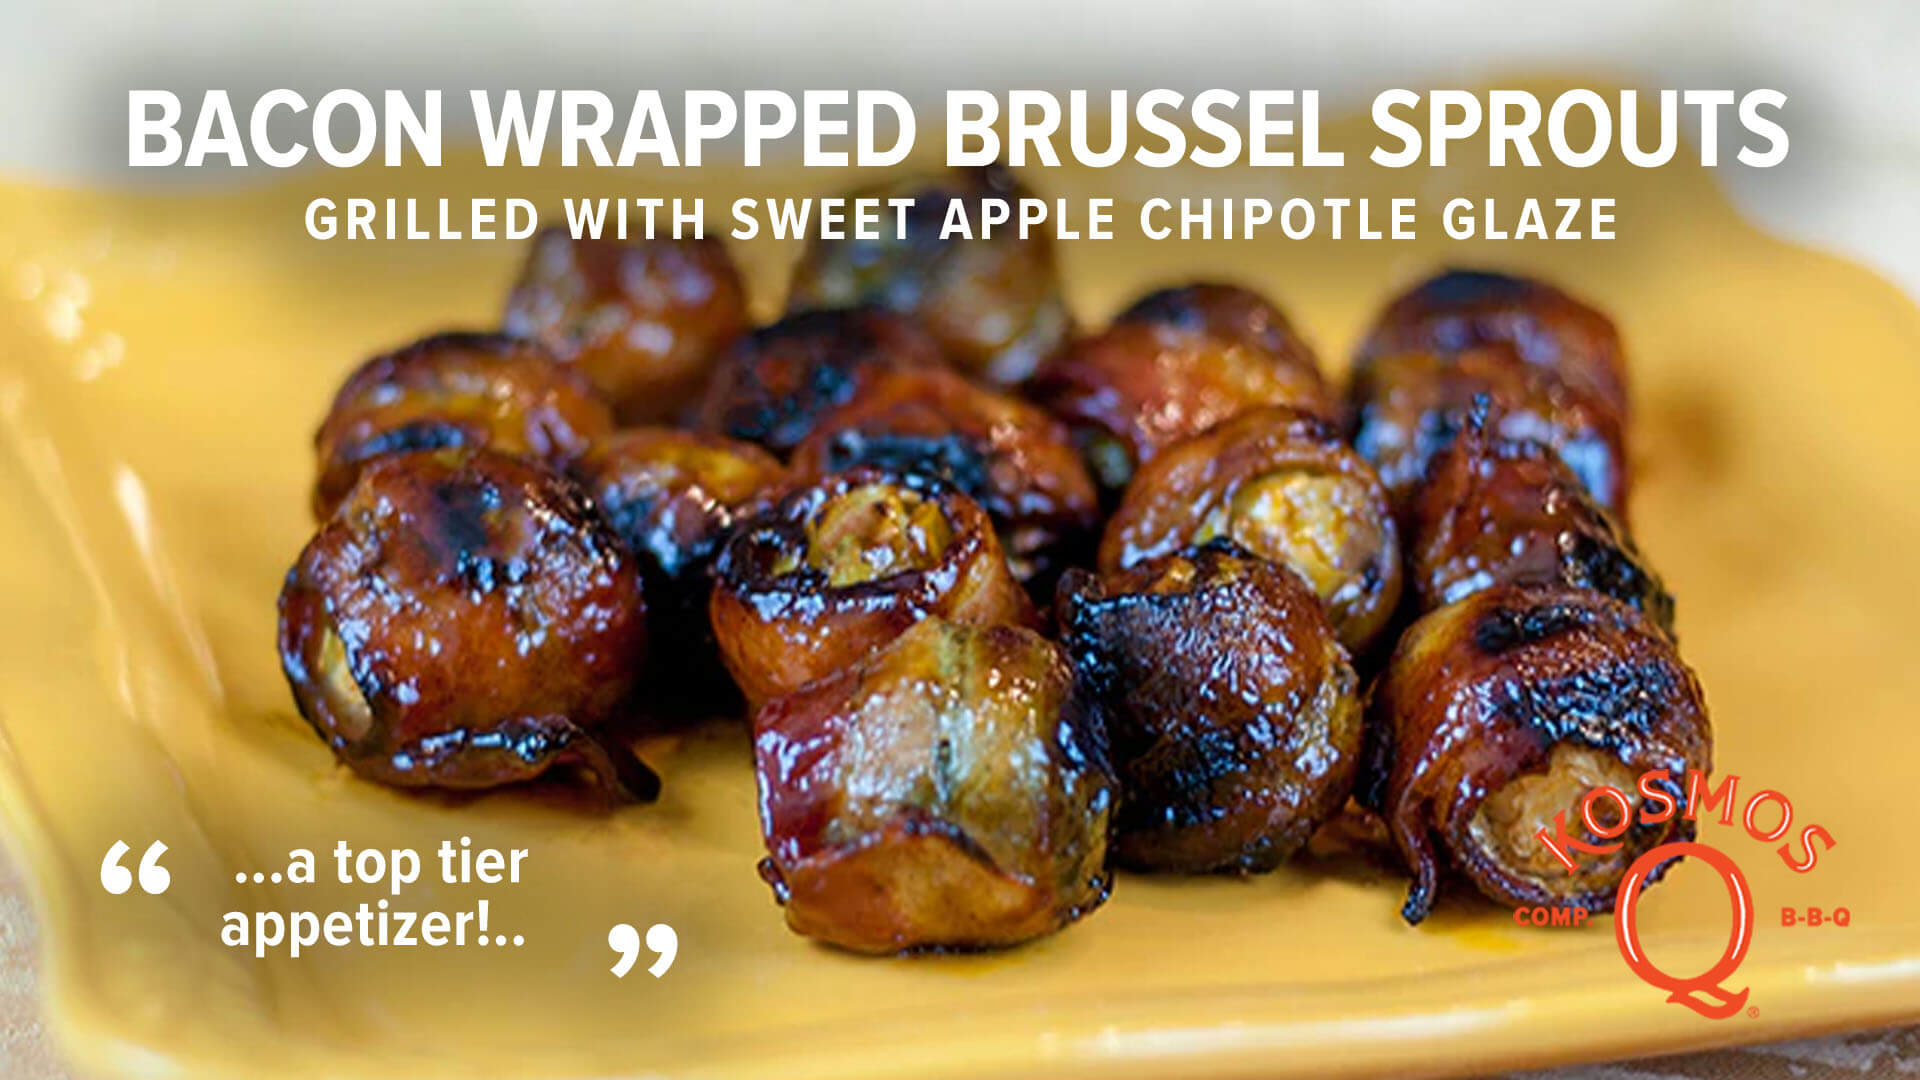 Kosmo's Bacon-Wrapped & Grilled Brussels Sprouts with Sweet Apple Chipotle Glaze